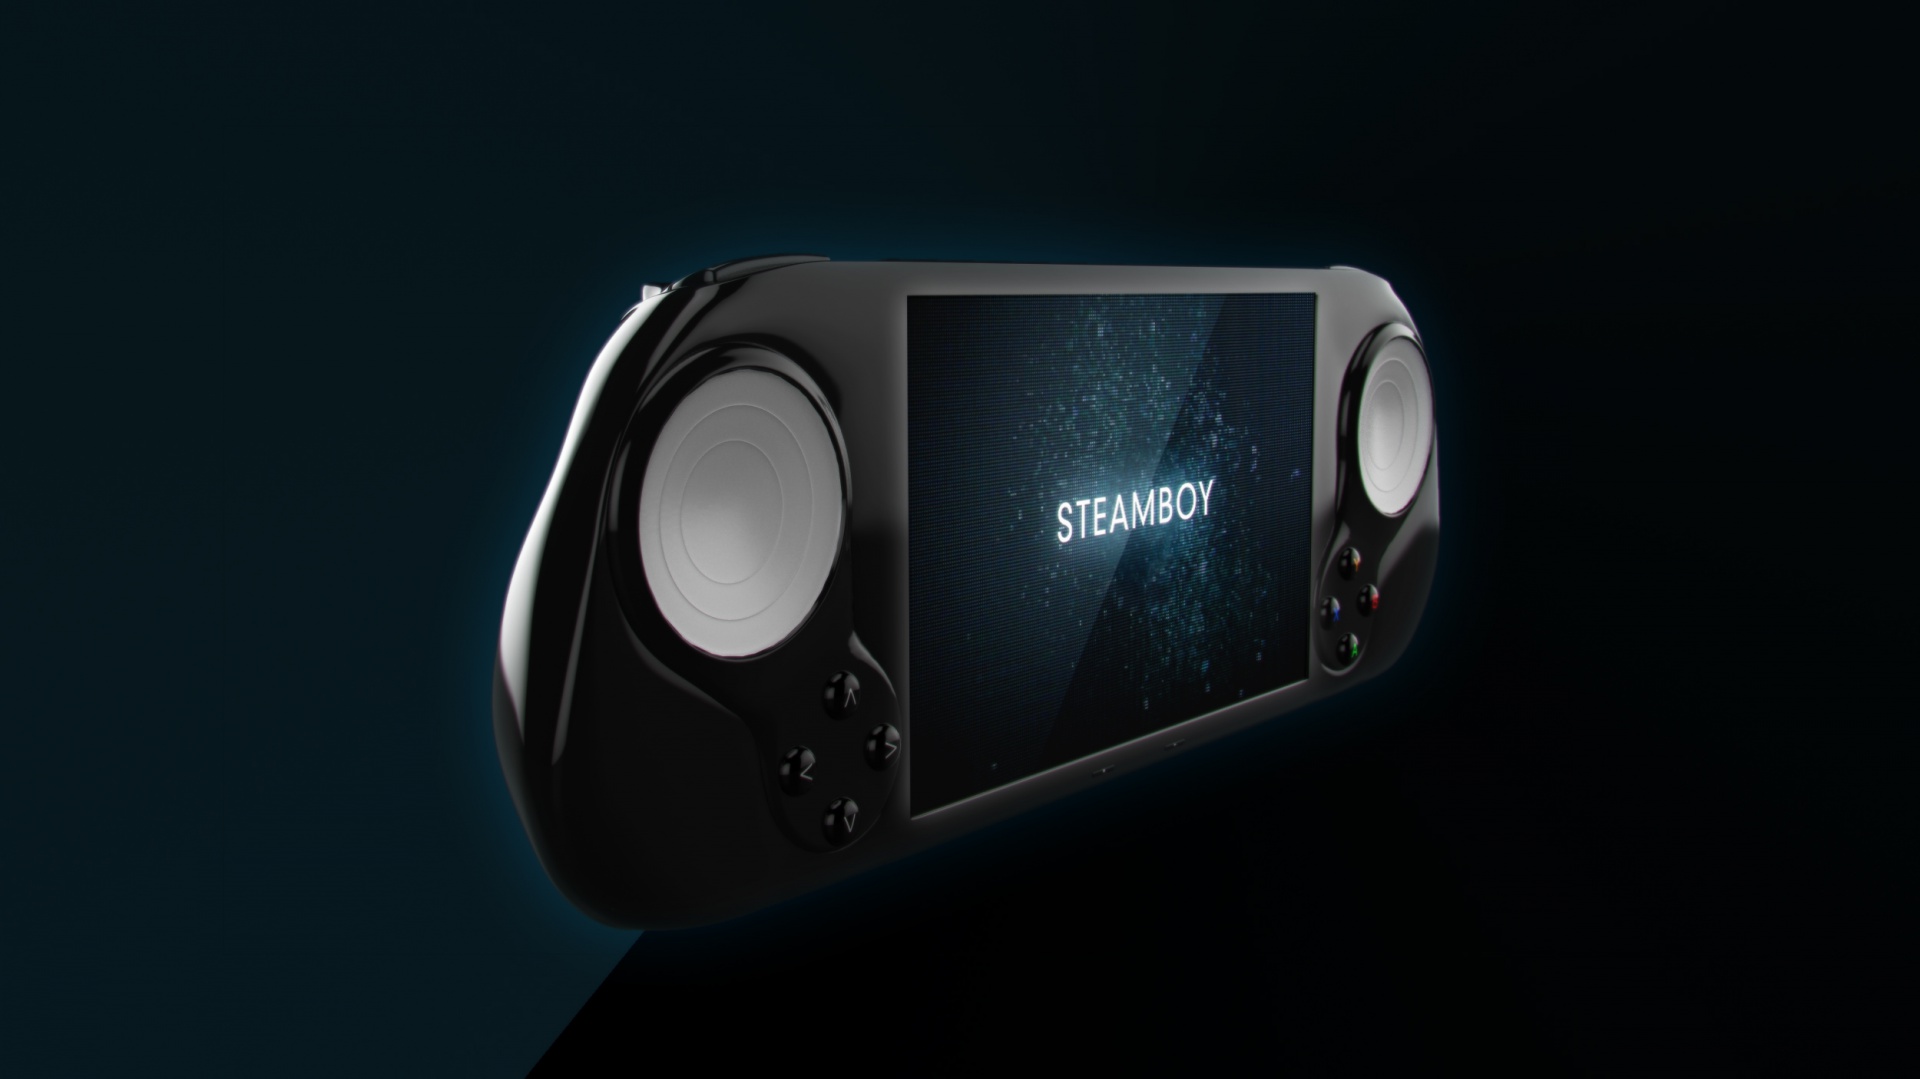 The SteamBoy is a Gaming Handheld After My Own Heart